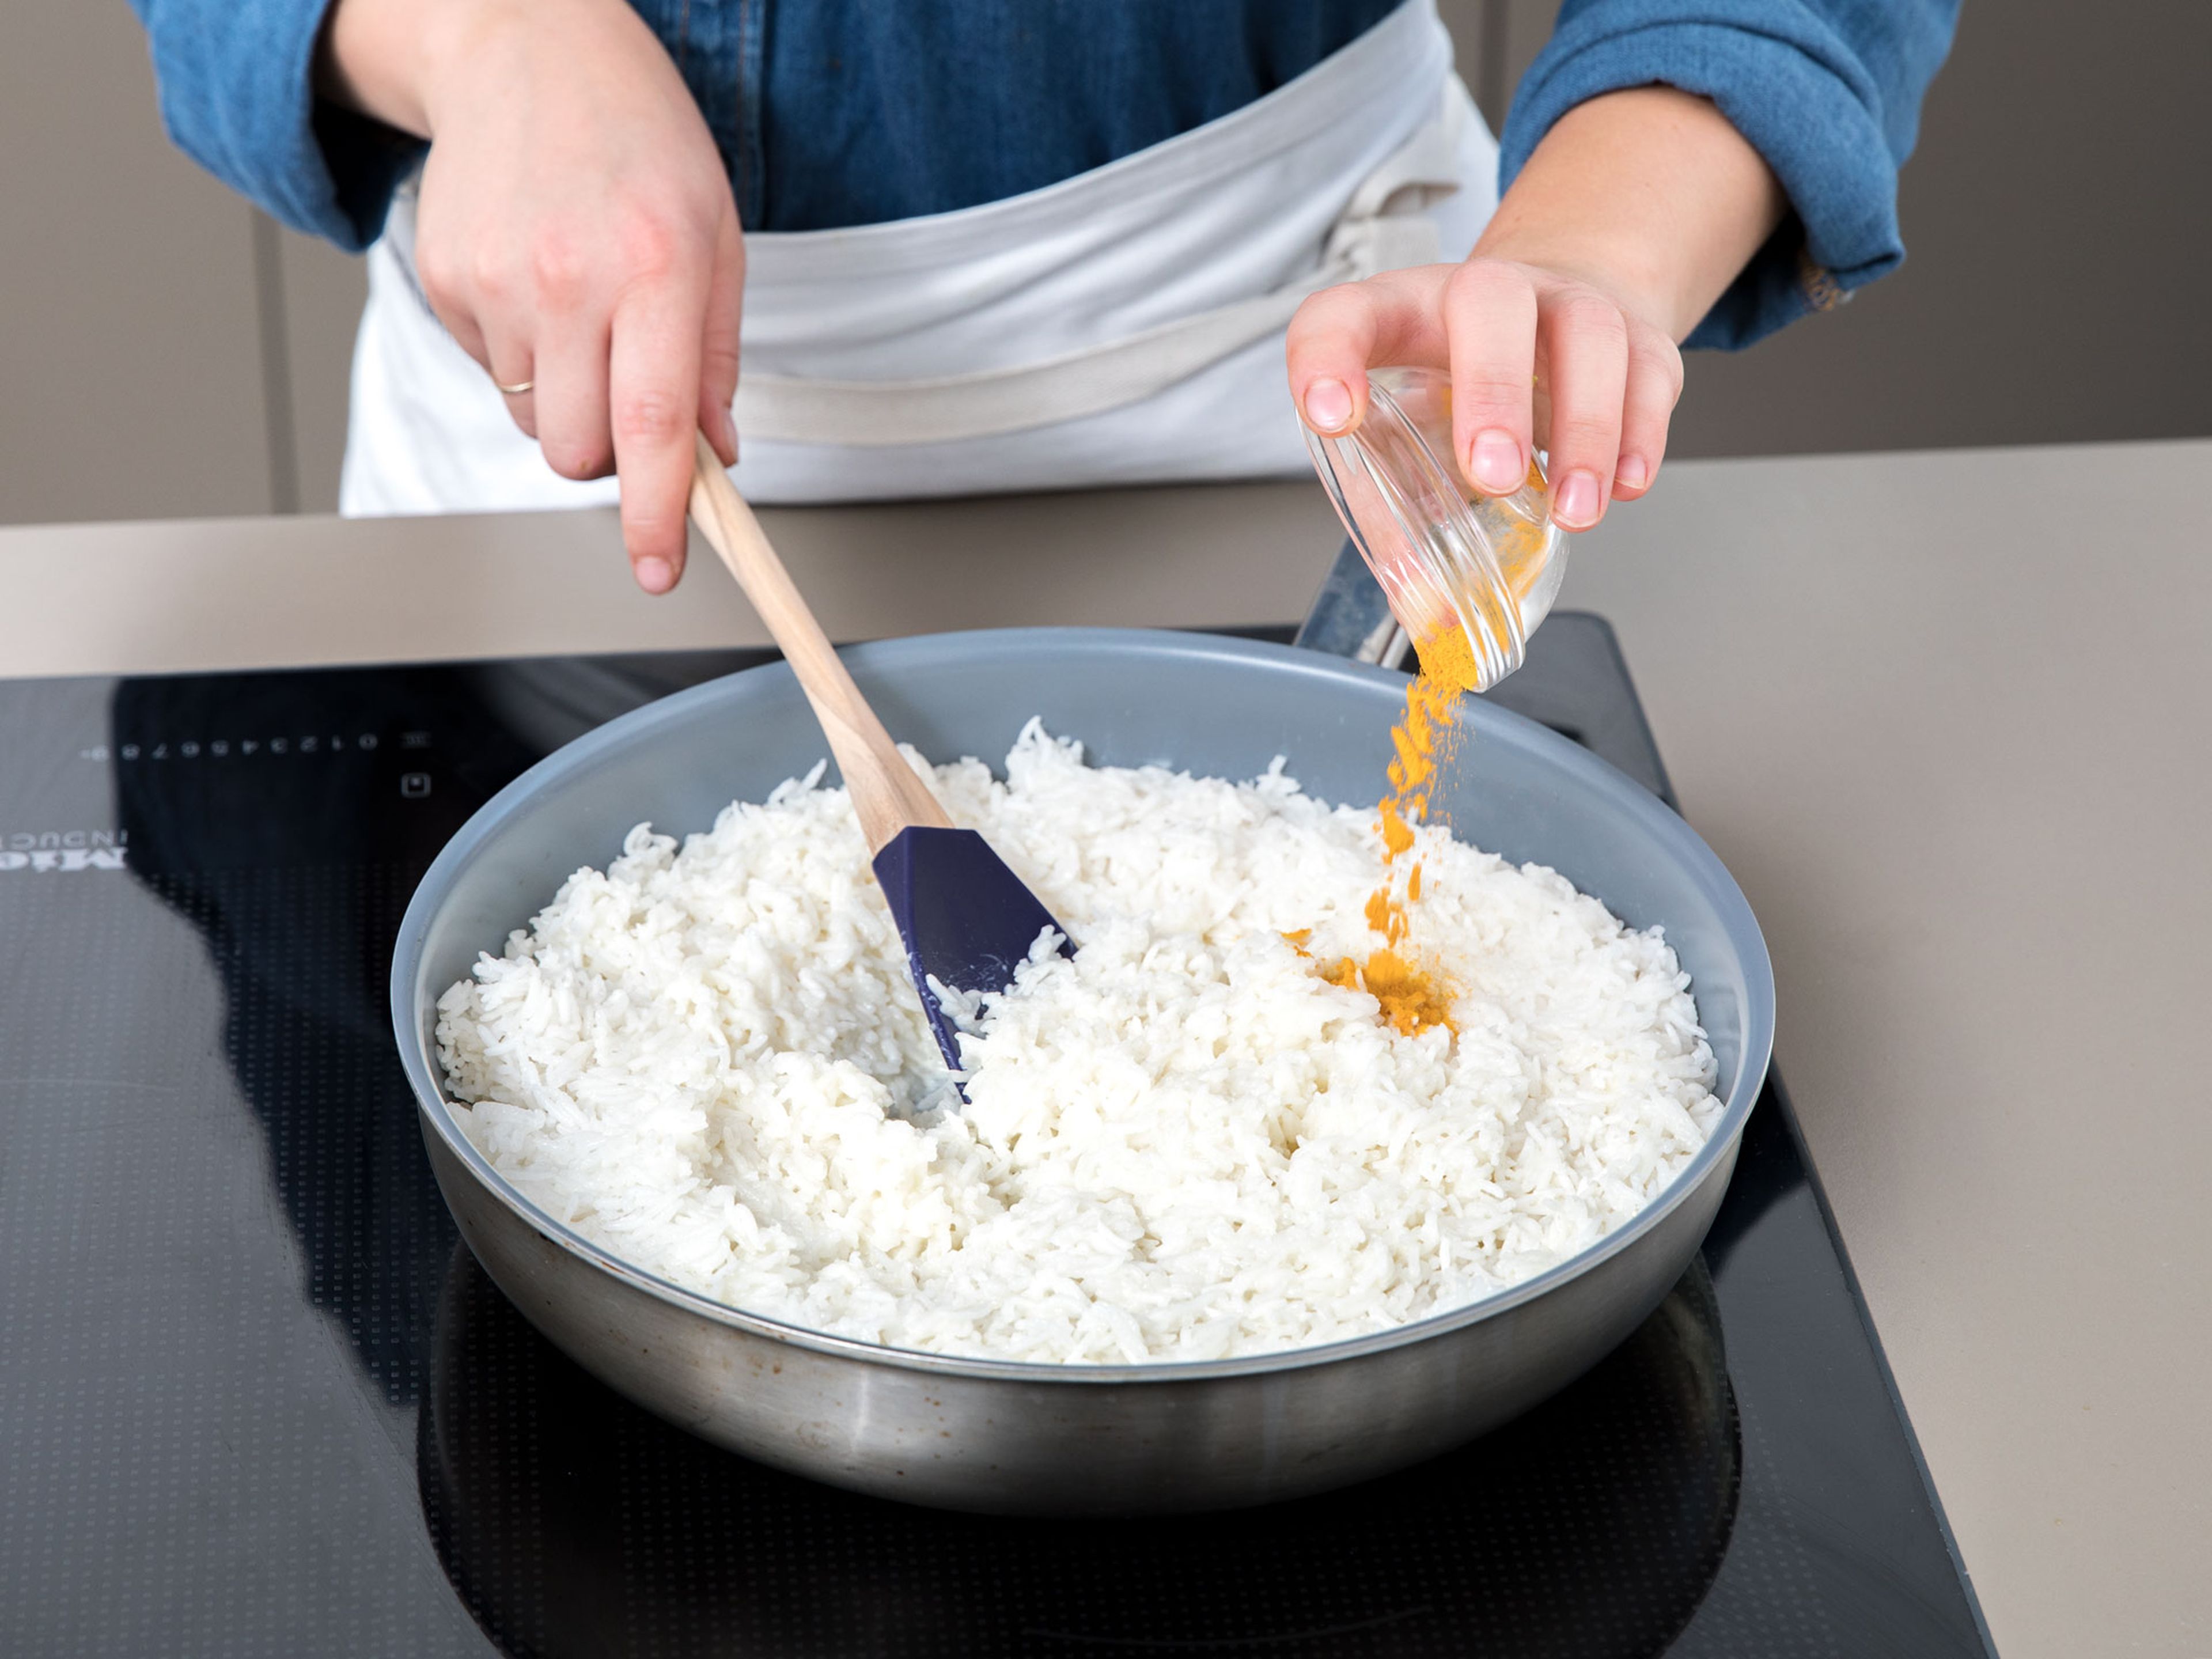 Add cooked rice, heavy cream, Parmesan cheese, and ground turmeric to a separate frying pan and stir to combine until the rice turns lightly yellow. Let simmer for approx. 5 min. while stirring regularly.